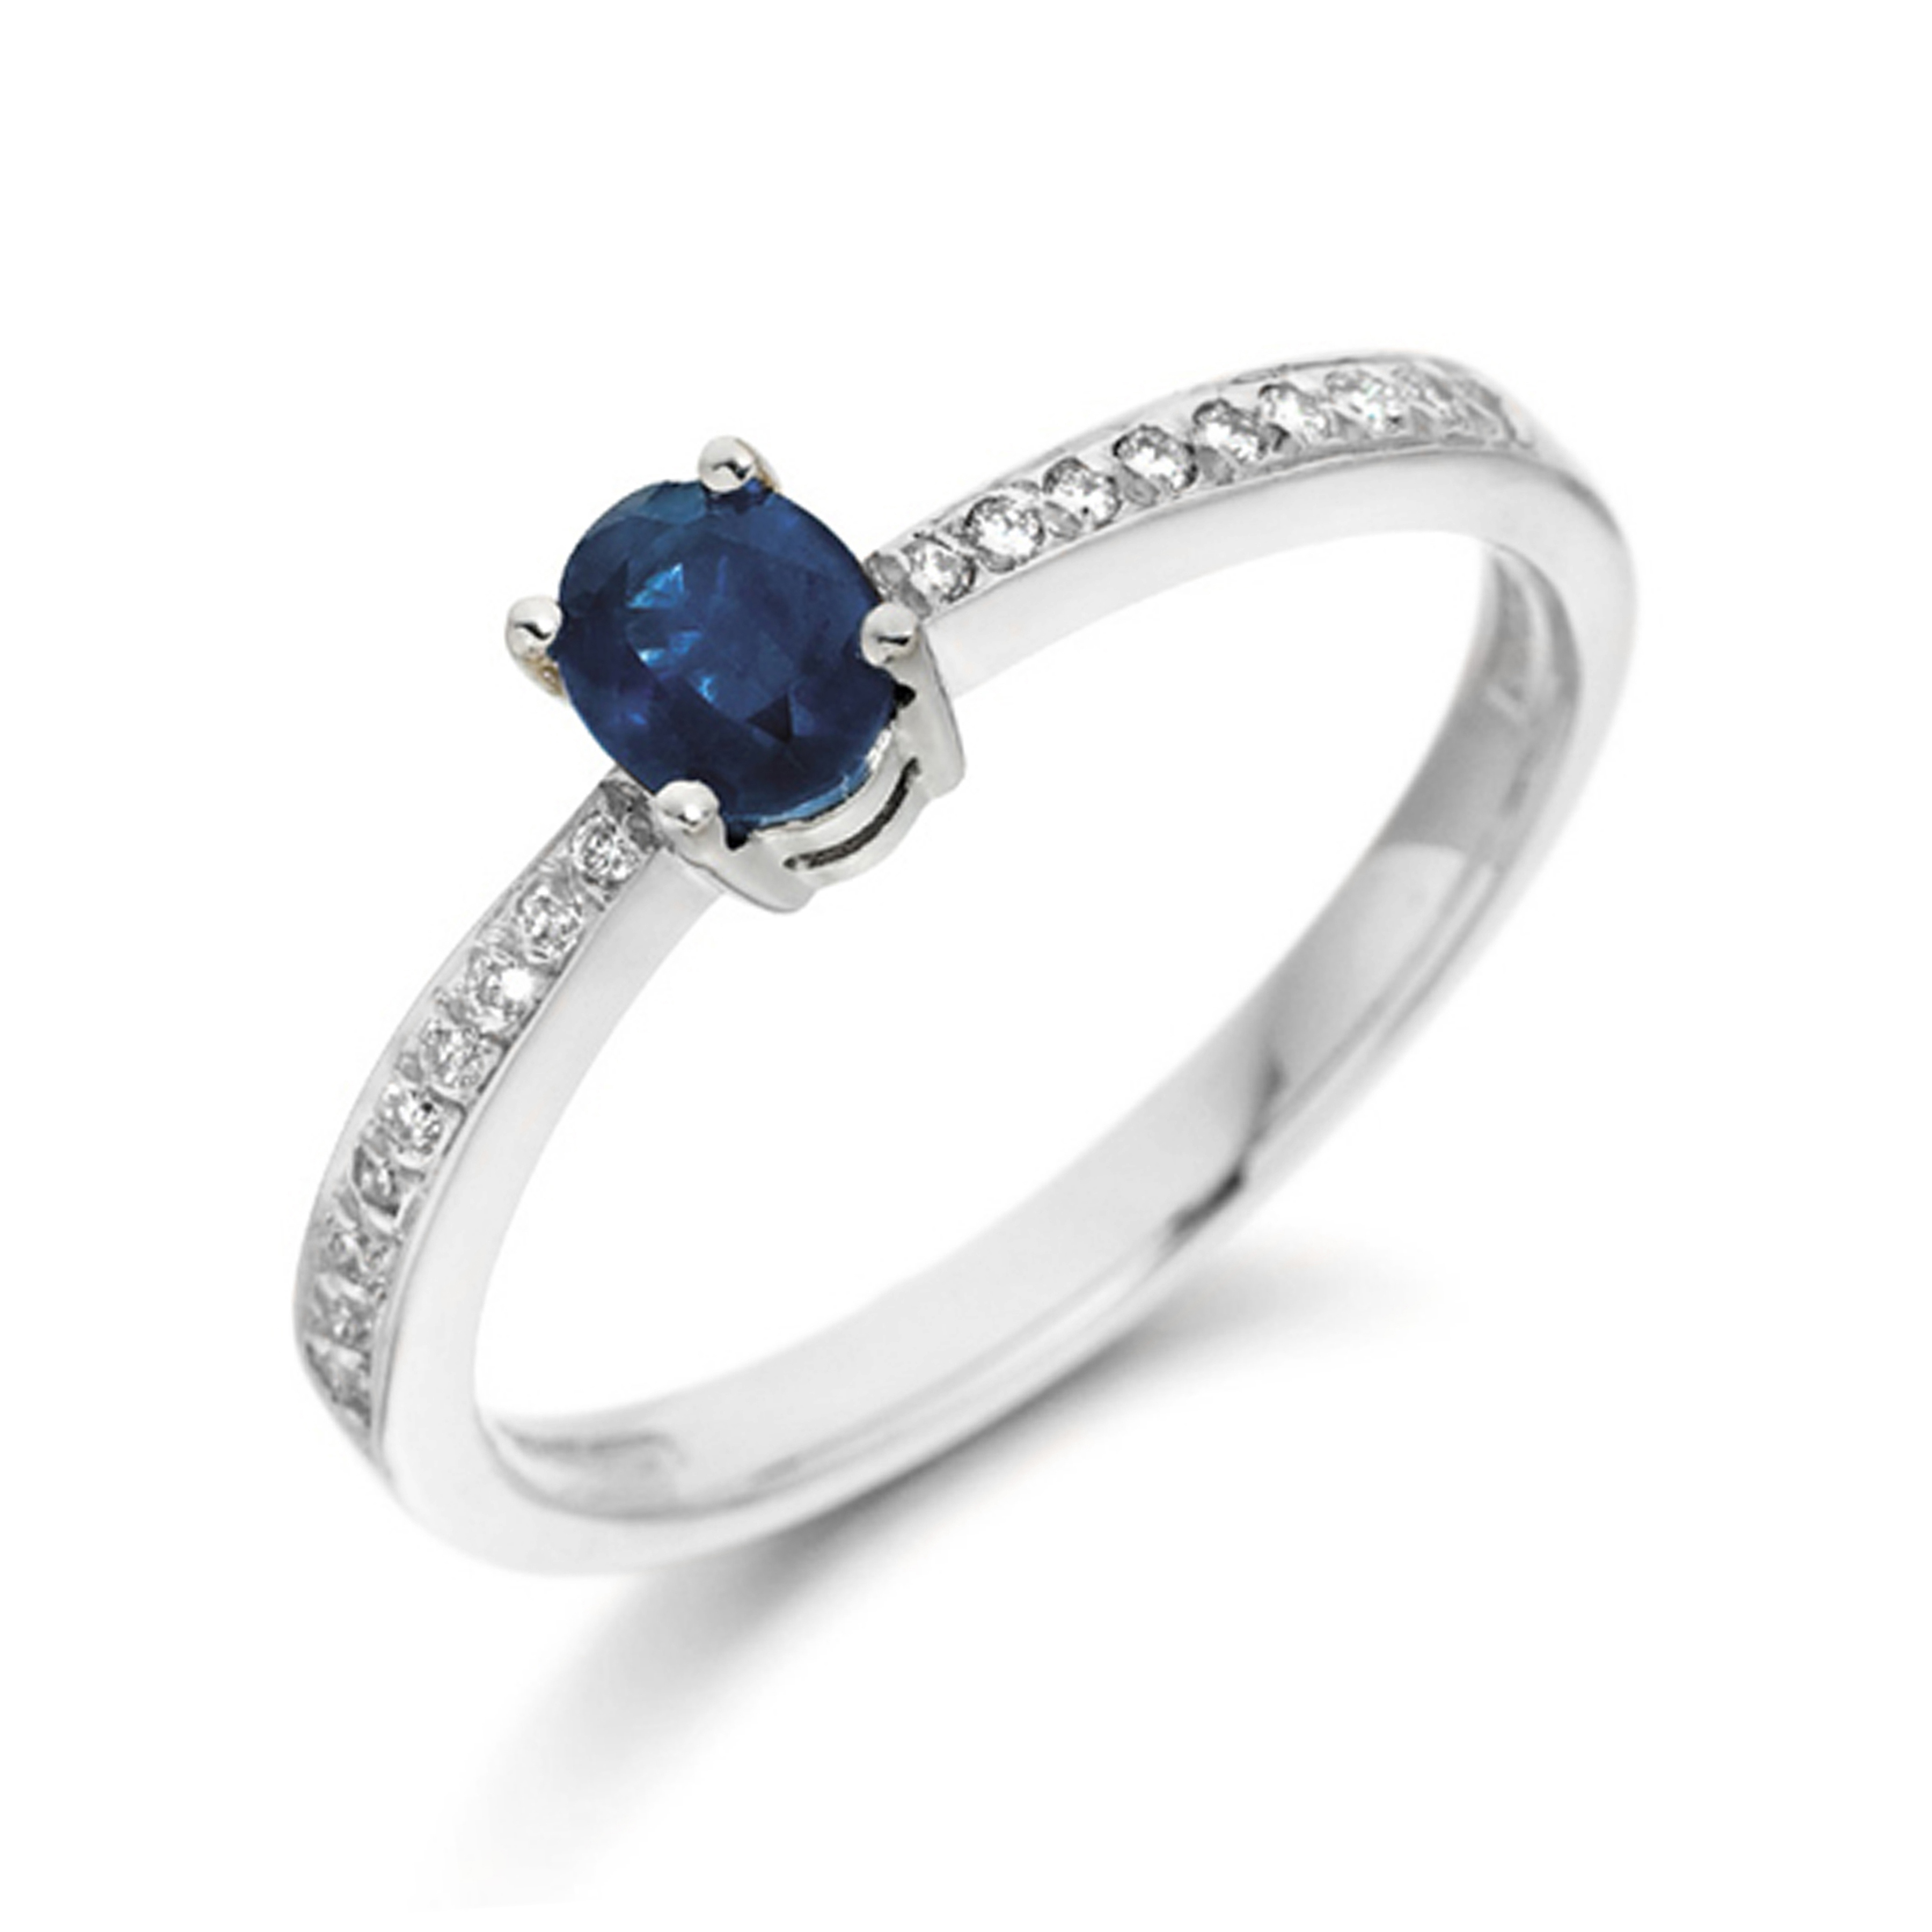 6X4mm Oval Blue Sapphire Stones On Shoulder Diamond And Gemstone Engagement Ring